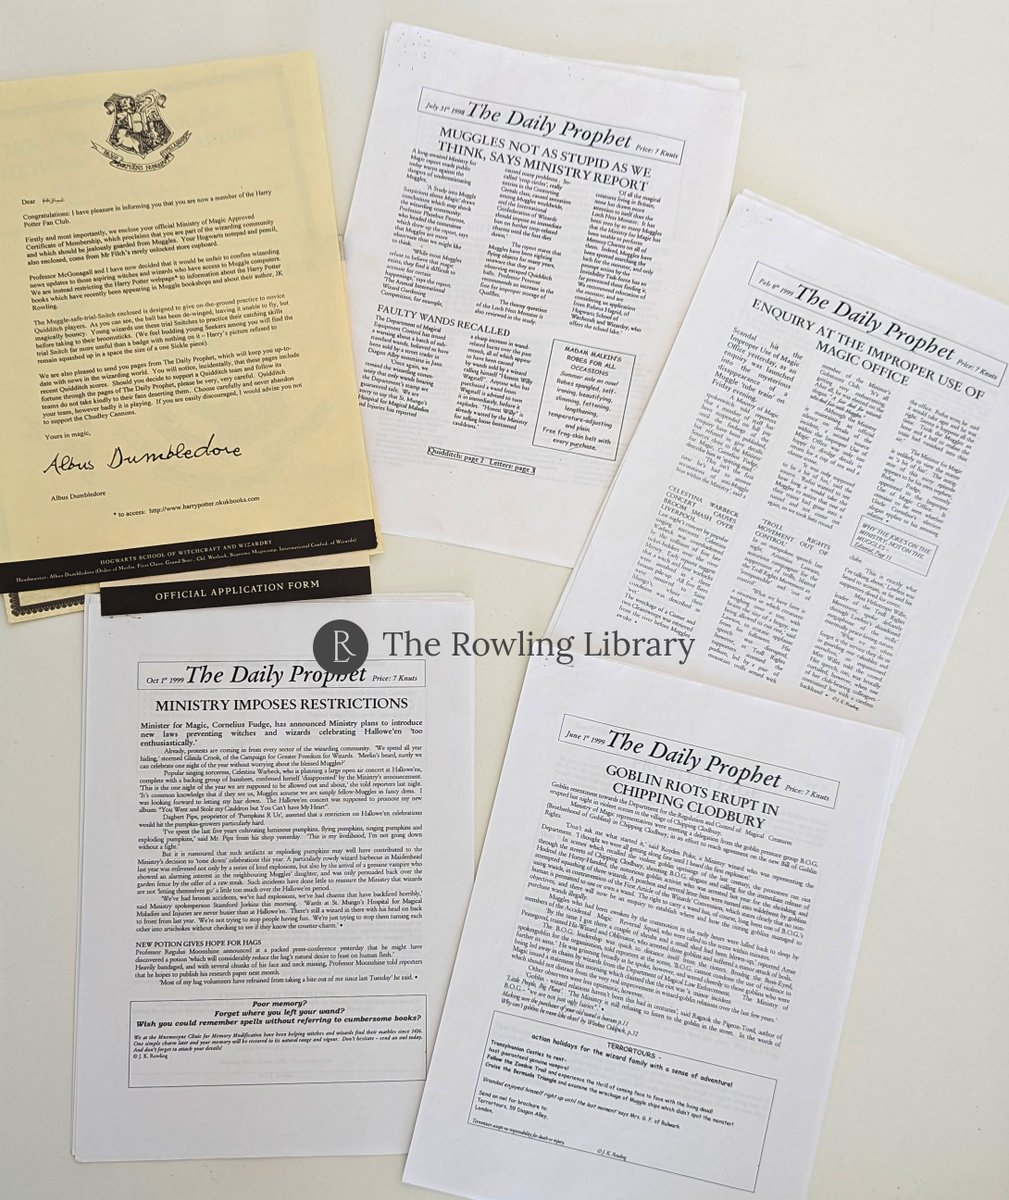 In 1998 and 1999, members of Bloomsbury's official Harry Potter Fan Club received 4 issues of The Daily Prophet Newsletter: they were fictional copies of the magical newspaper. The incredible part? They were entirely written by @jk_rowling (though I wonder whether Rowling also…